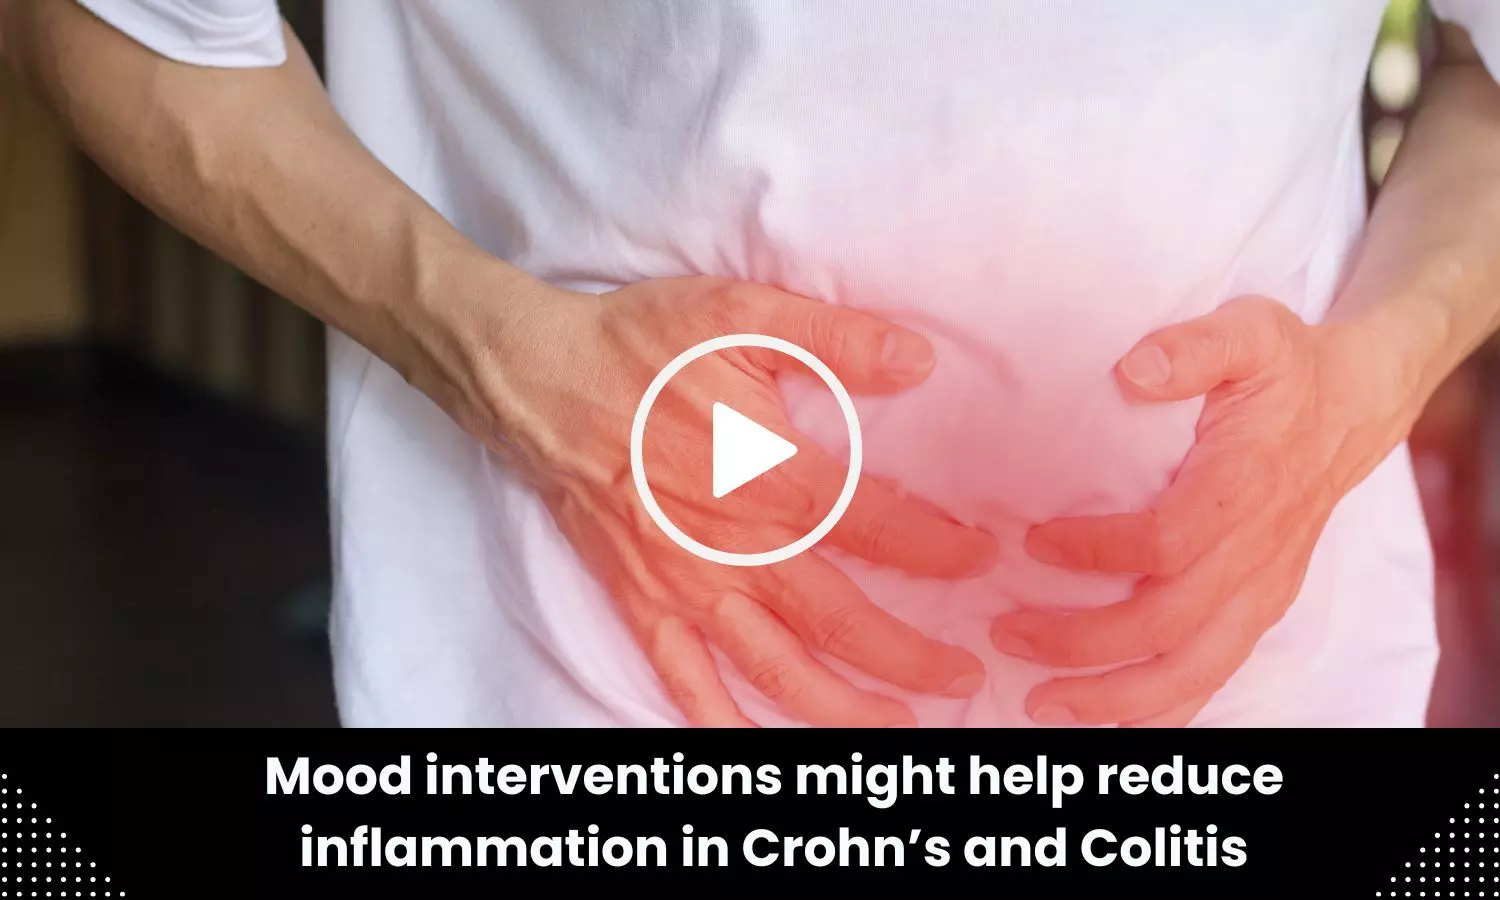 Mood interventions might help reduce inflammation in Crohn’s and Colitis